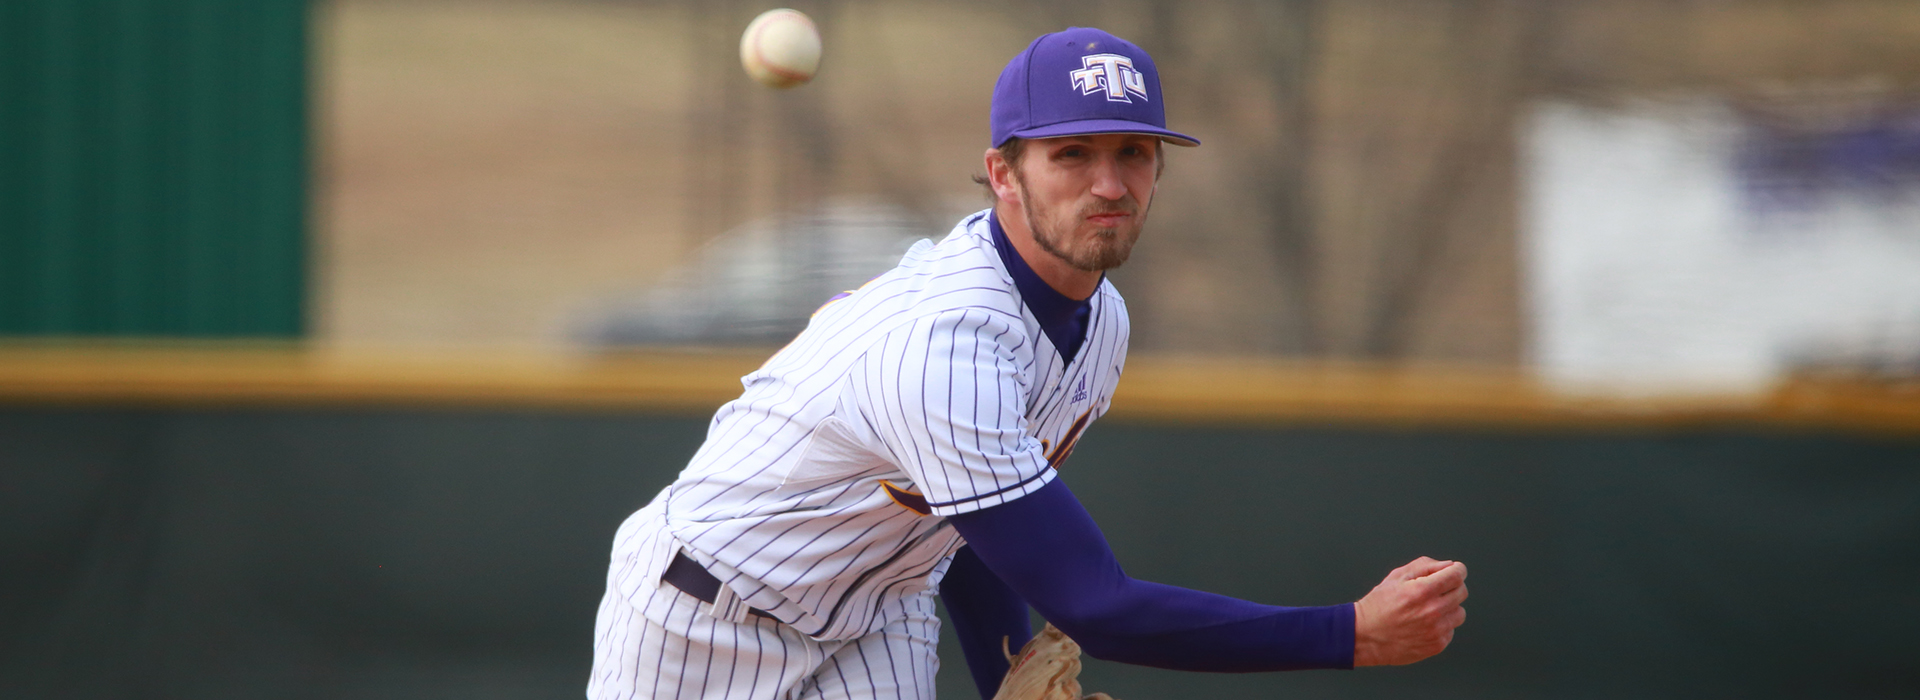 Golden Eagles host North Alabama in midweek action, Tuesday tilt moved to 3 PM